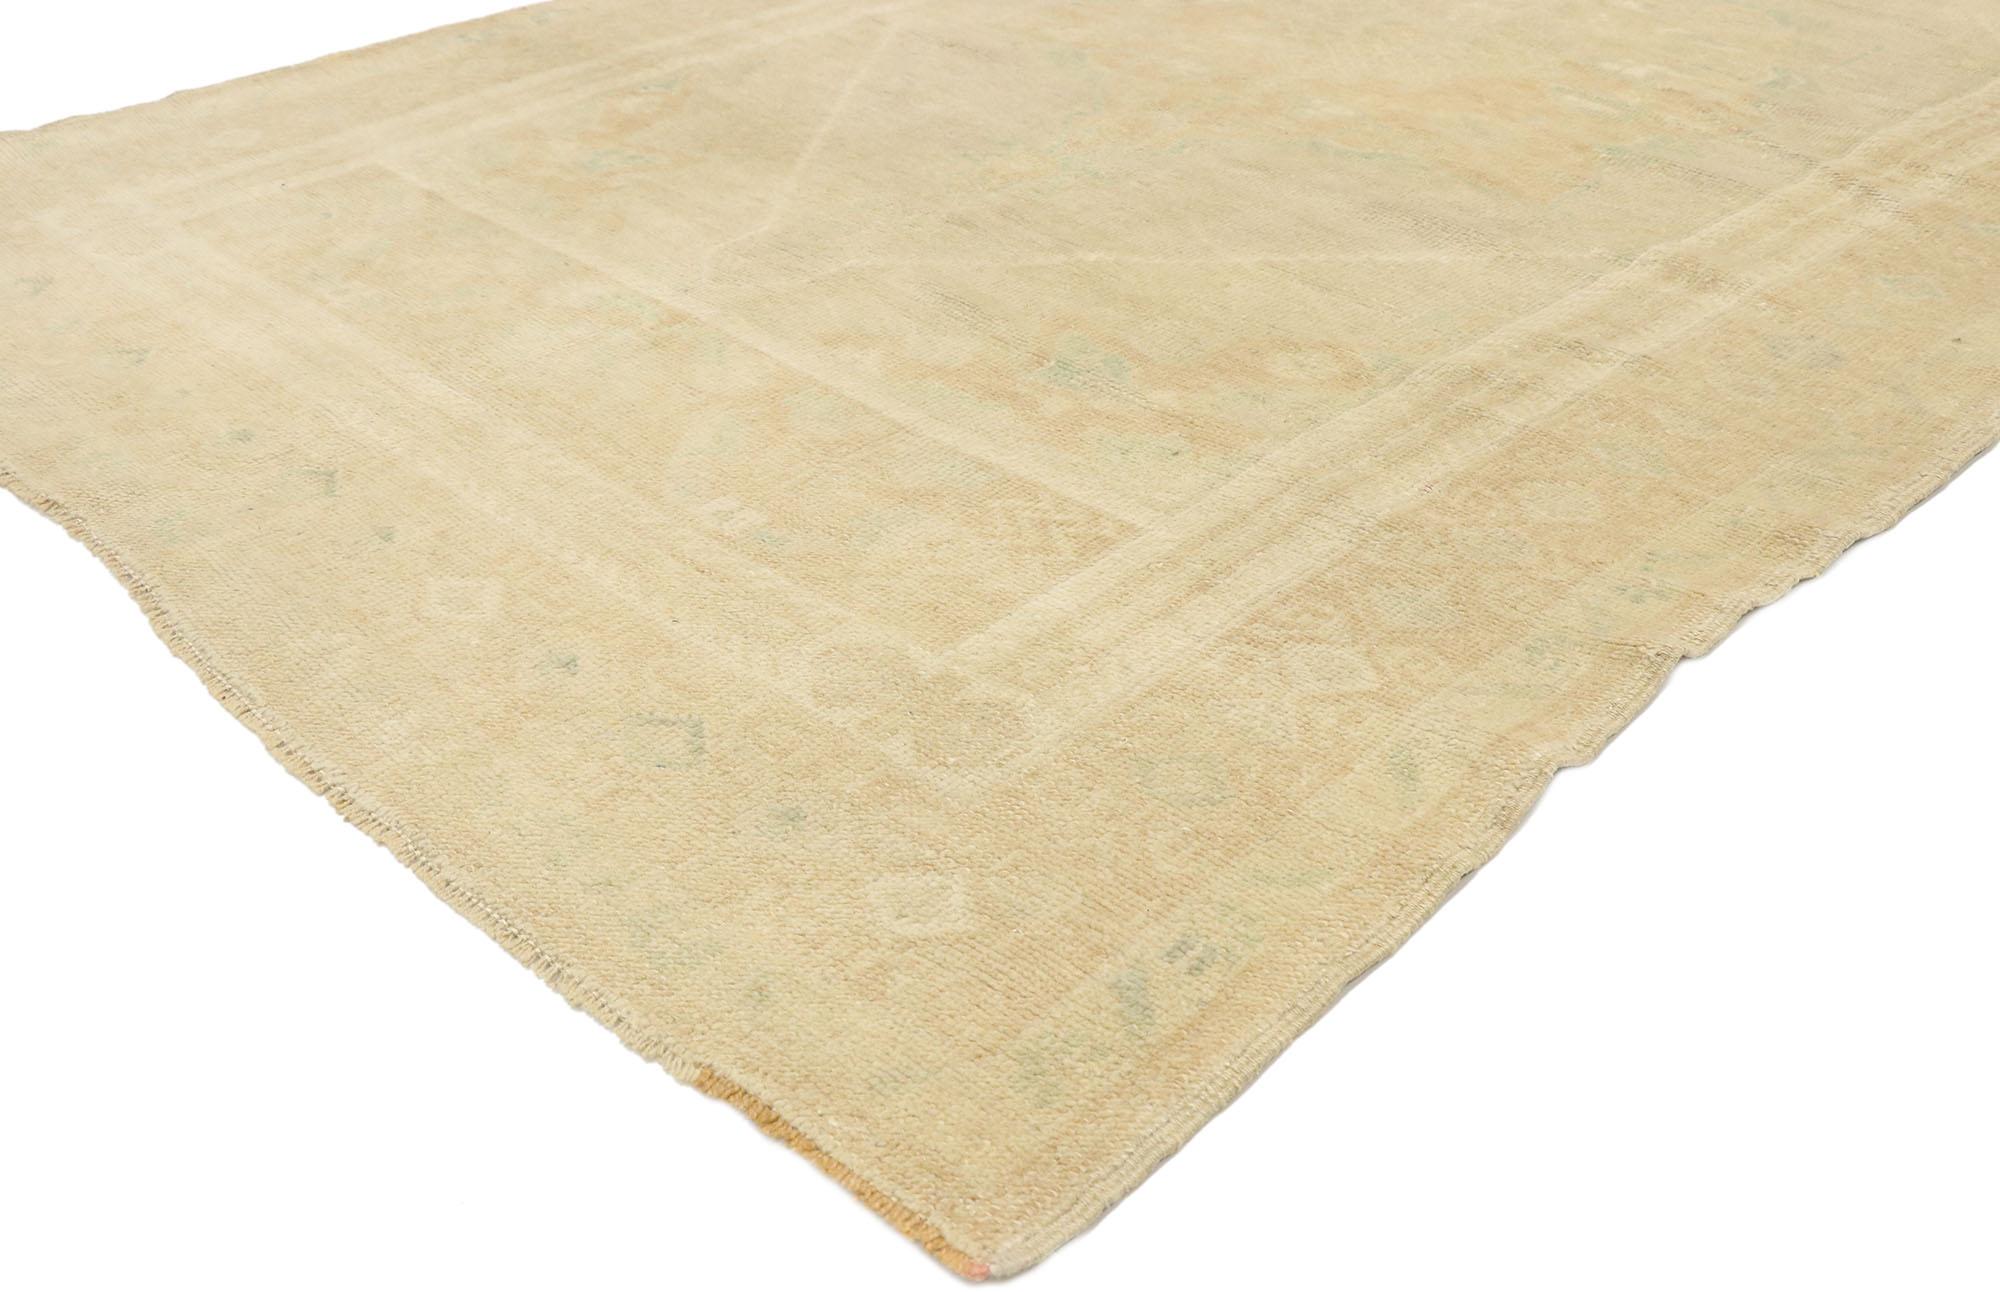 52974 vintage Turkish Oushak rug with Minimalist French Country Cottage style. Effortless beauty and soft, bespoke vibes meet Minimalist French Country Cottage style in this hand knotted wool vintage Turkish Oushak rug. The ecru-tan antique washed